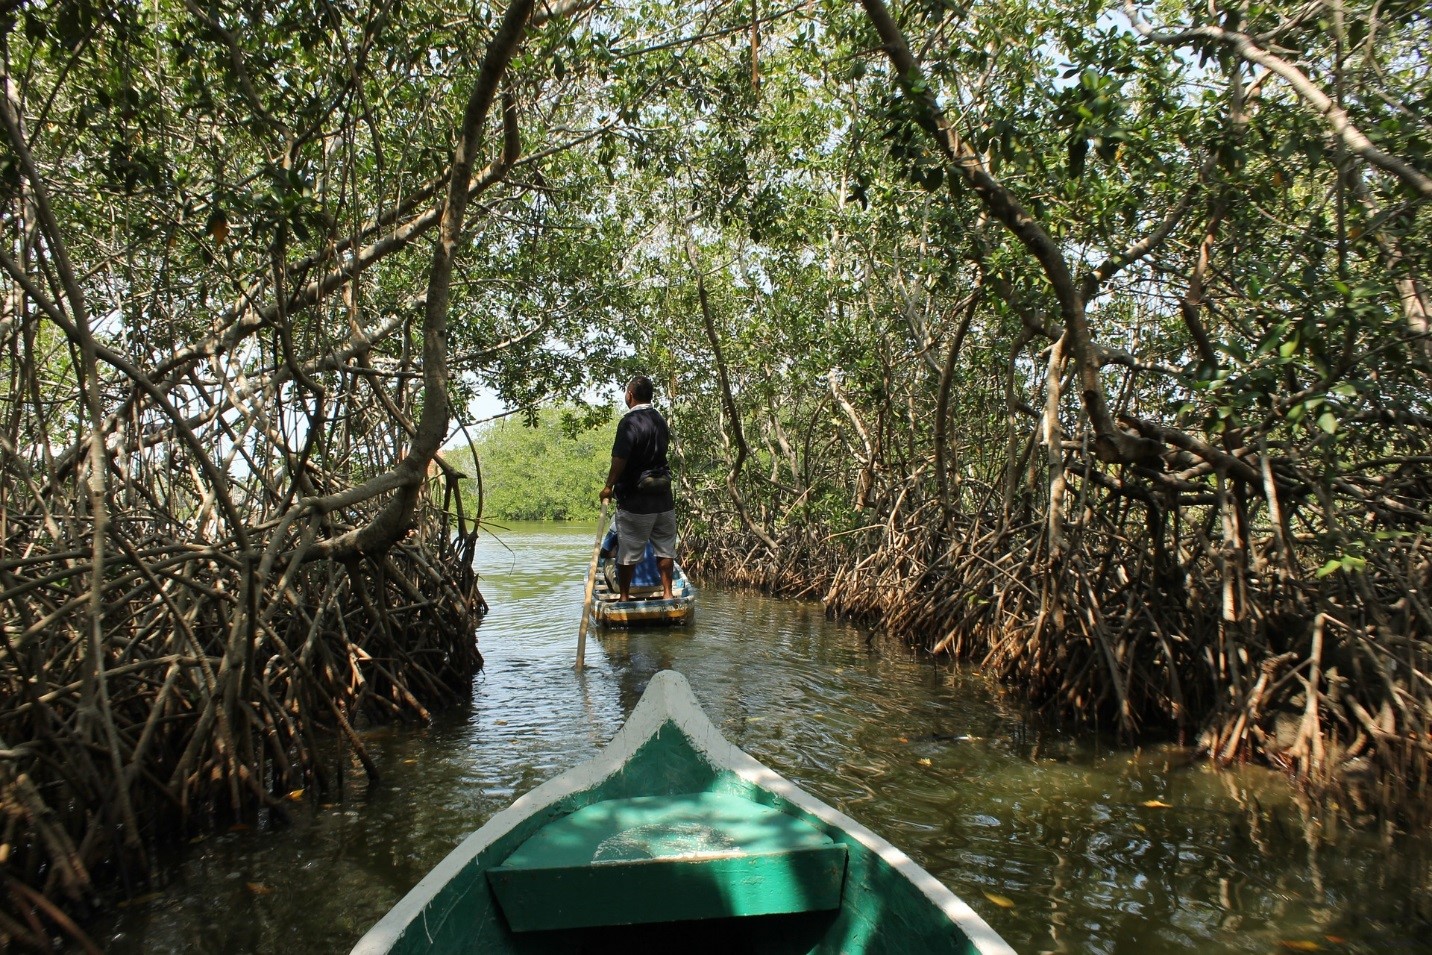 Boating in water through forest.